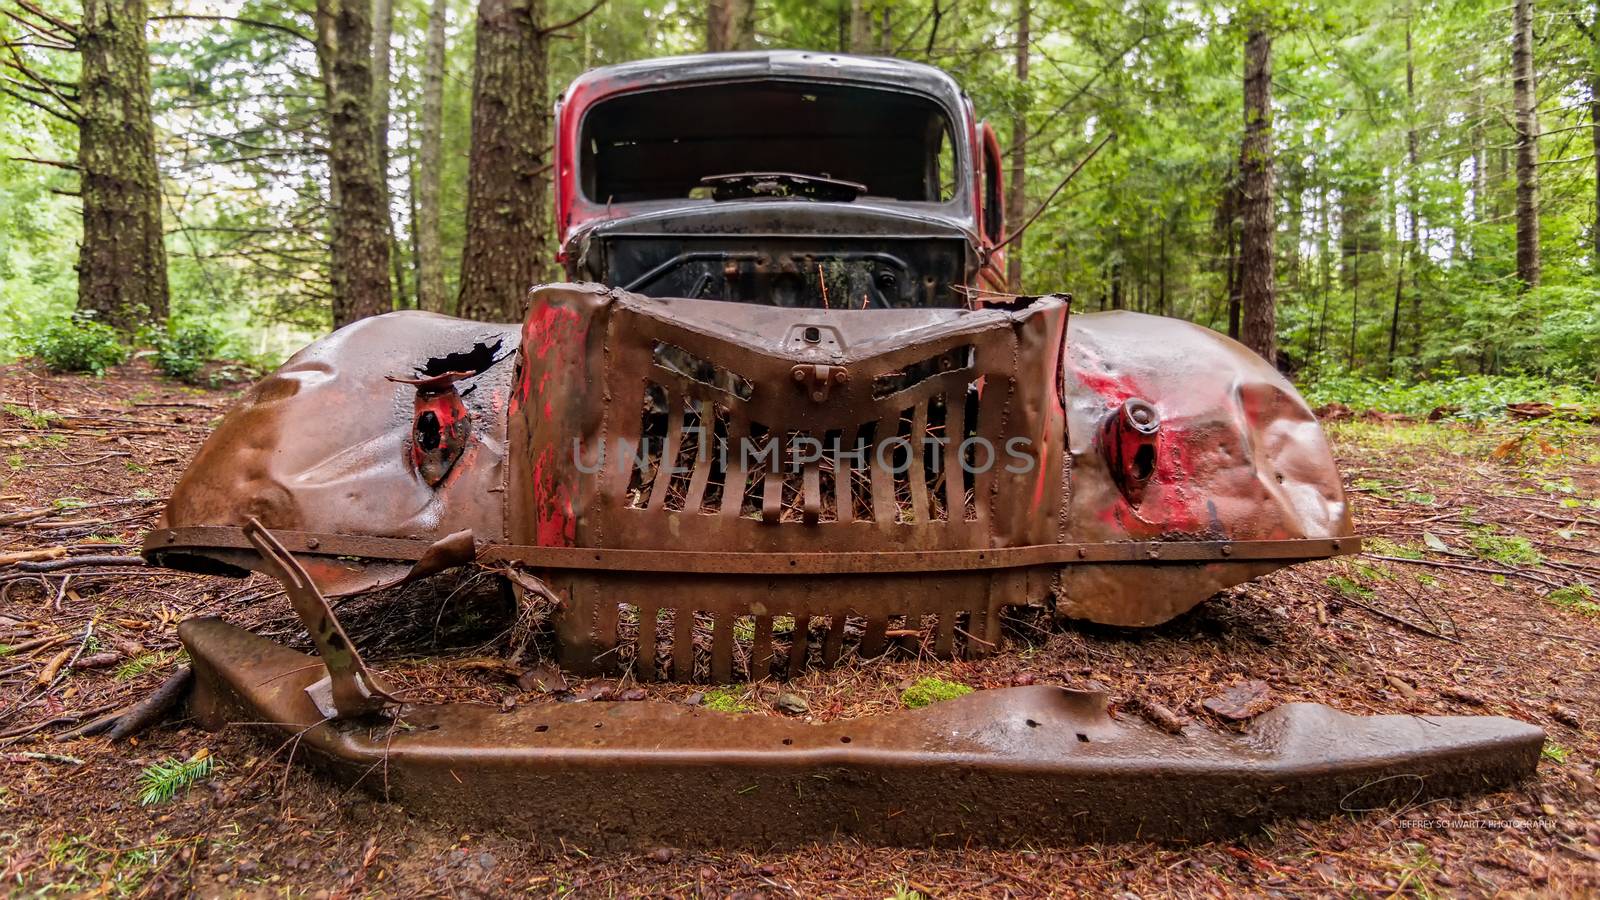 An Old Rusty Vehicle in the Forest by backyard_photography